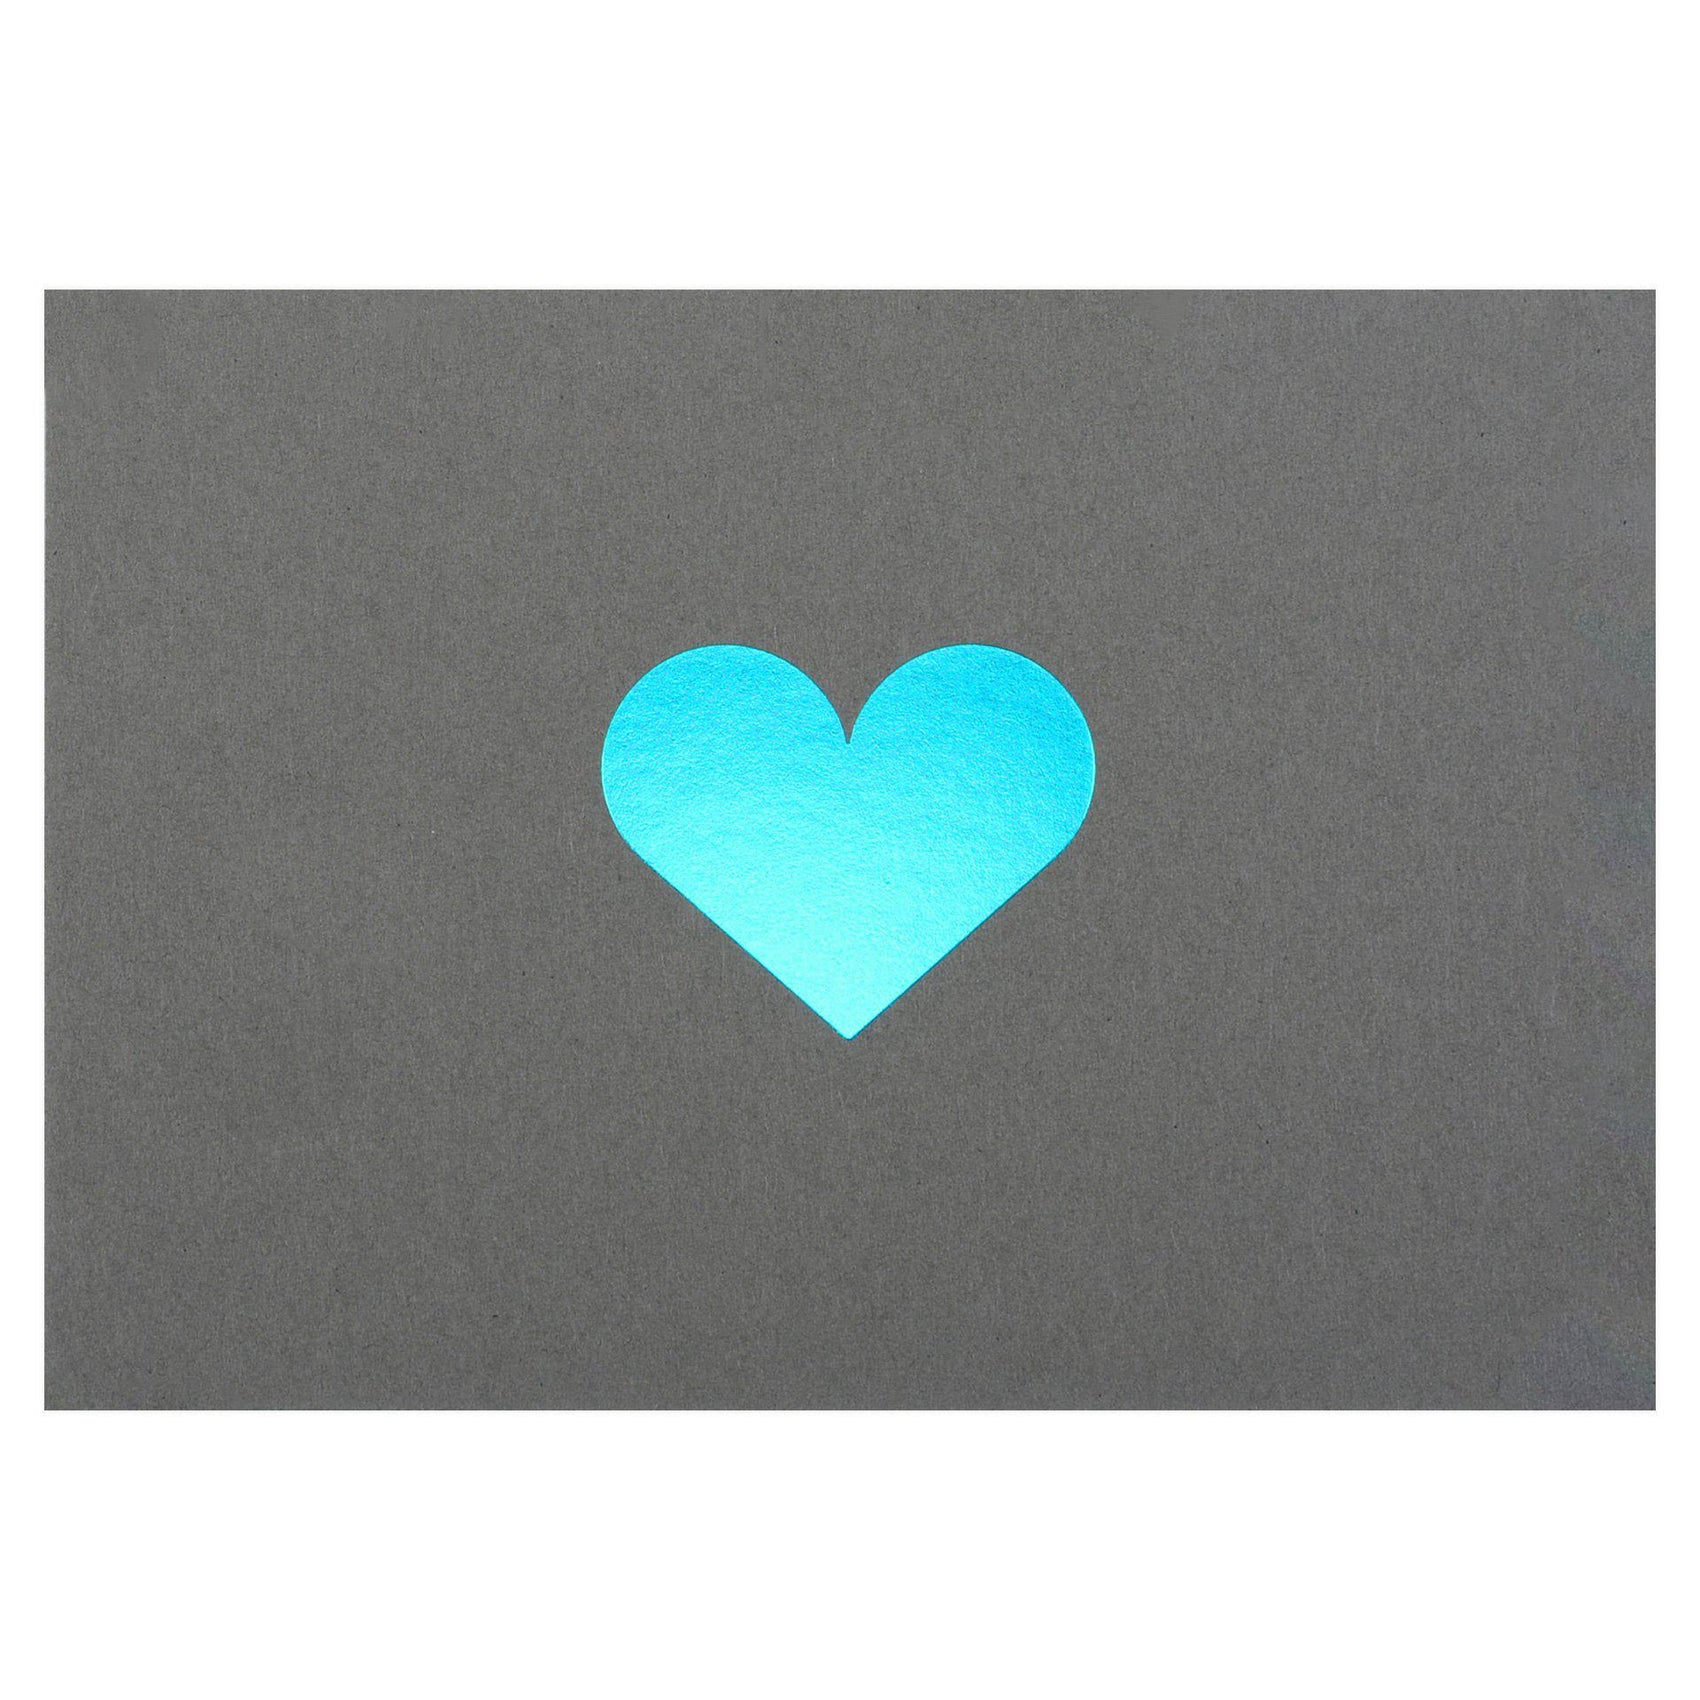 Turquoise Heart Greeting Card